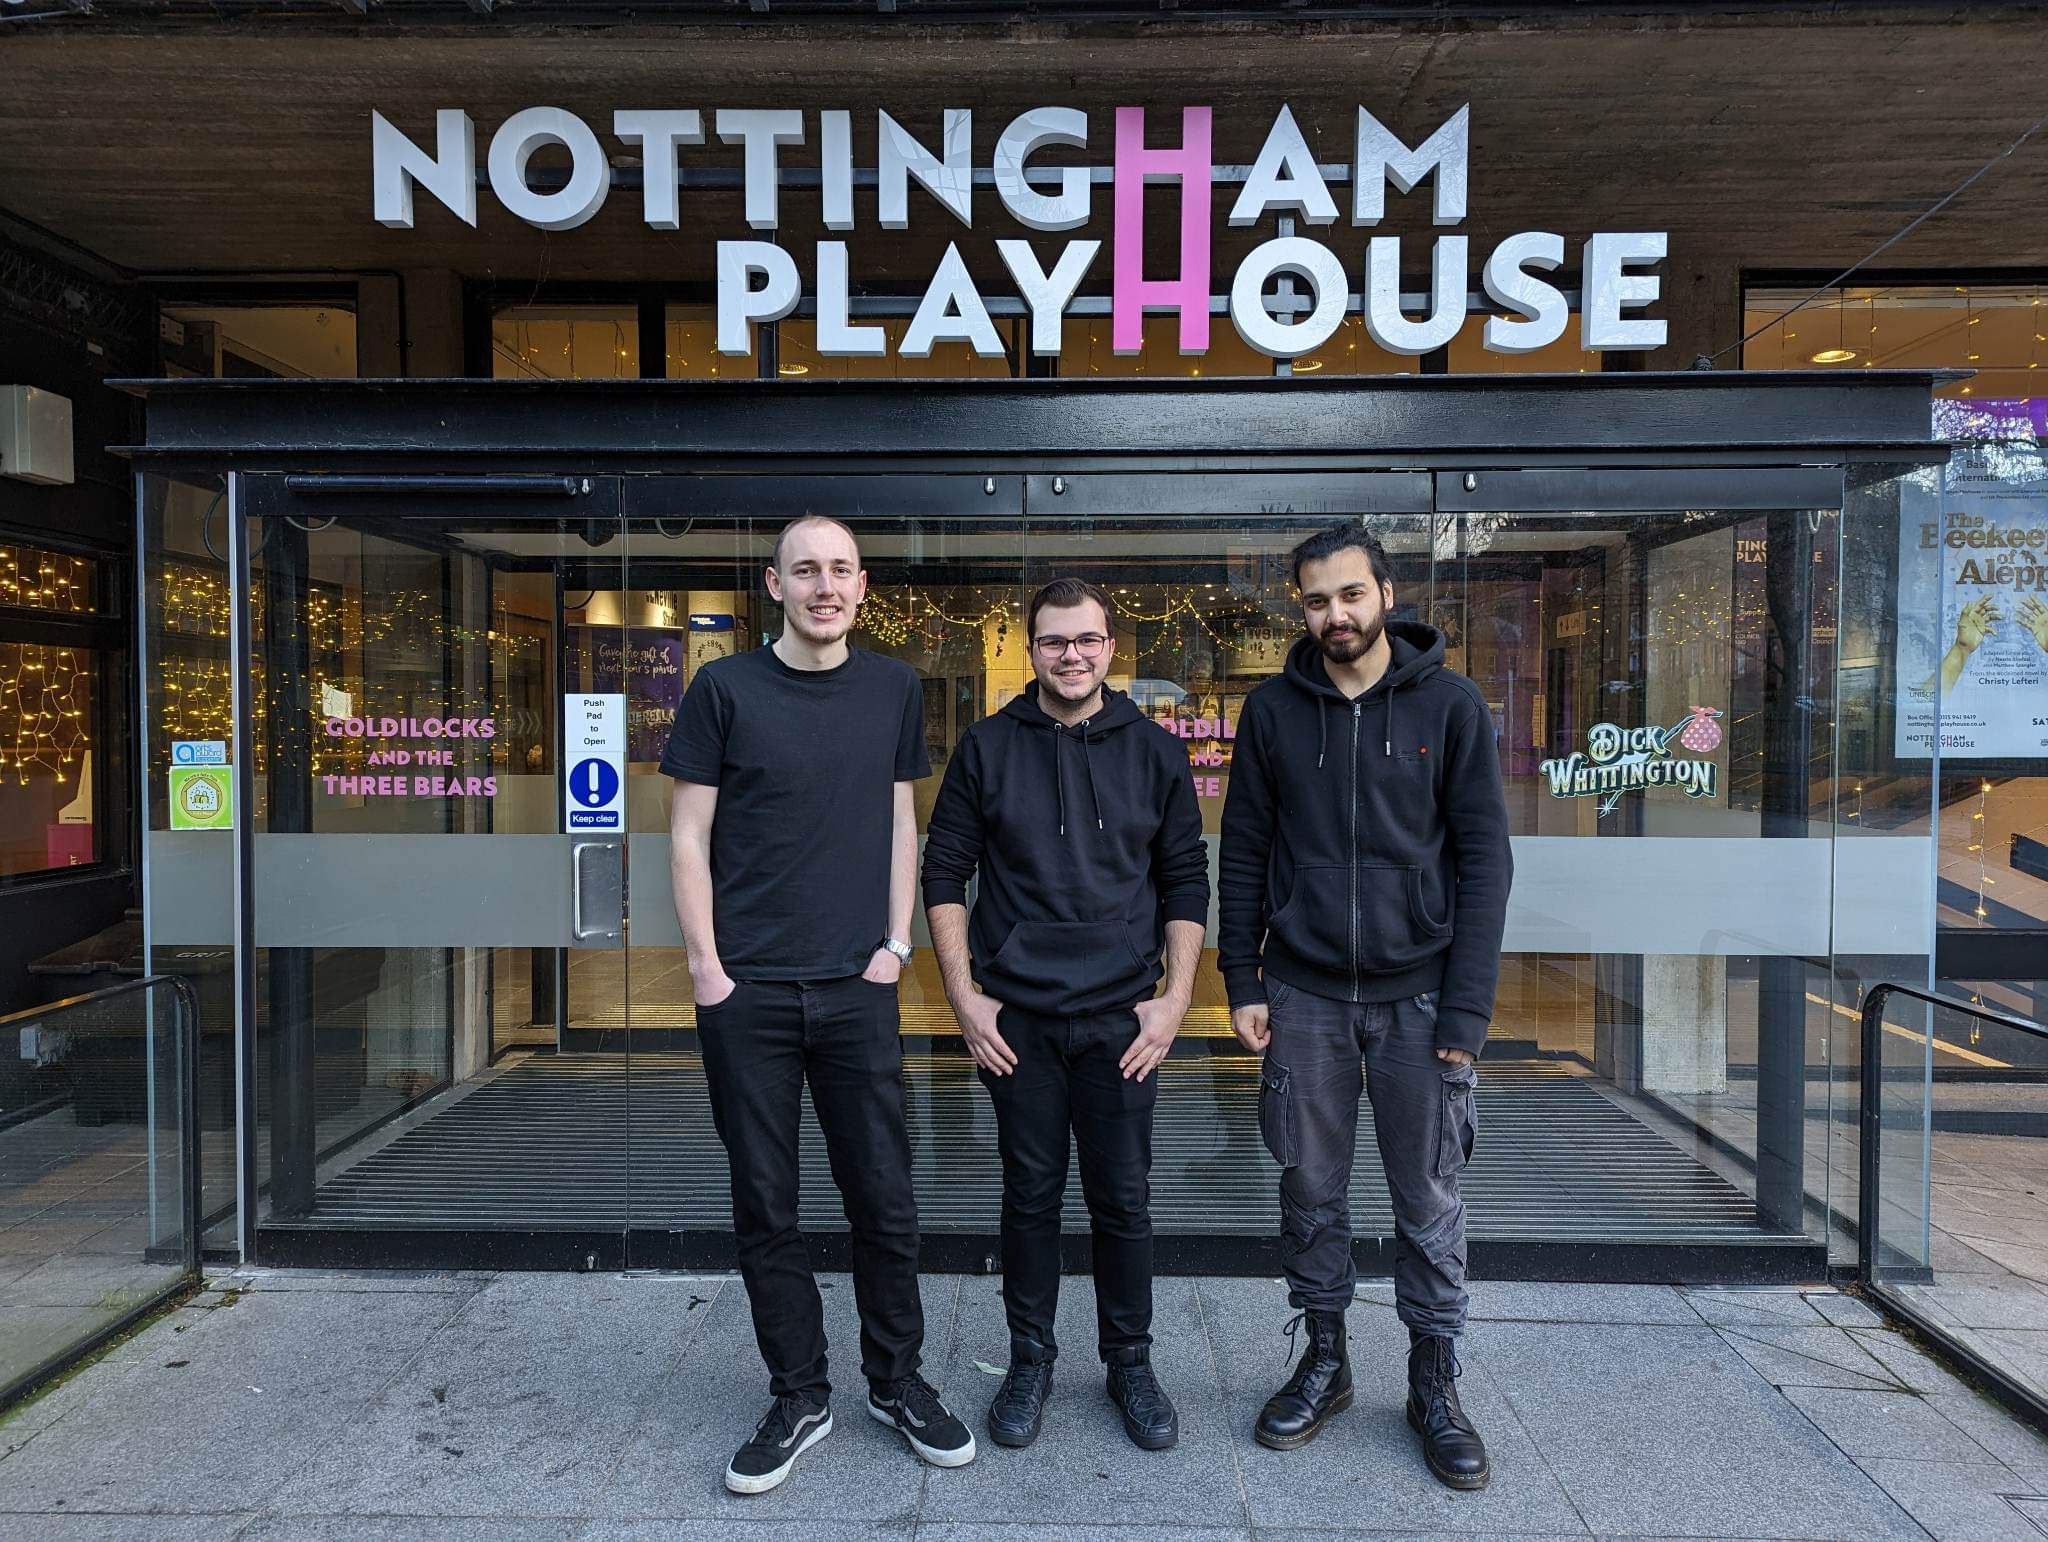 Pictured are Confetti work experience students, Jack, Ryan and Gurinder, standing outside the Nottingham Playhouse signage - where they completed their placement.